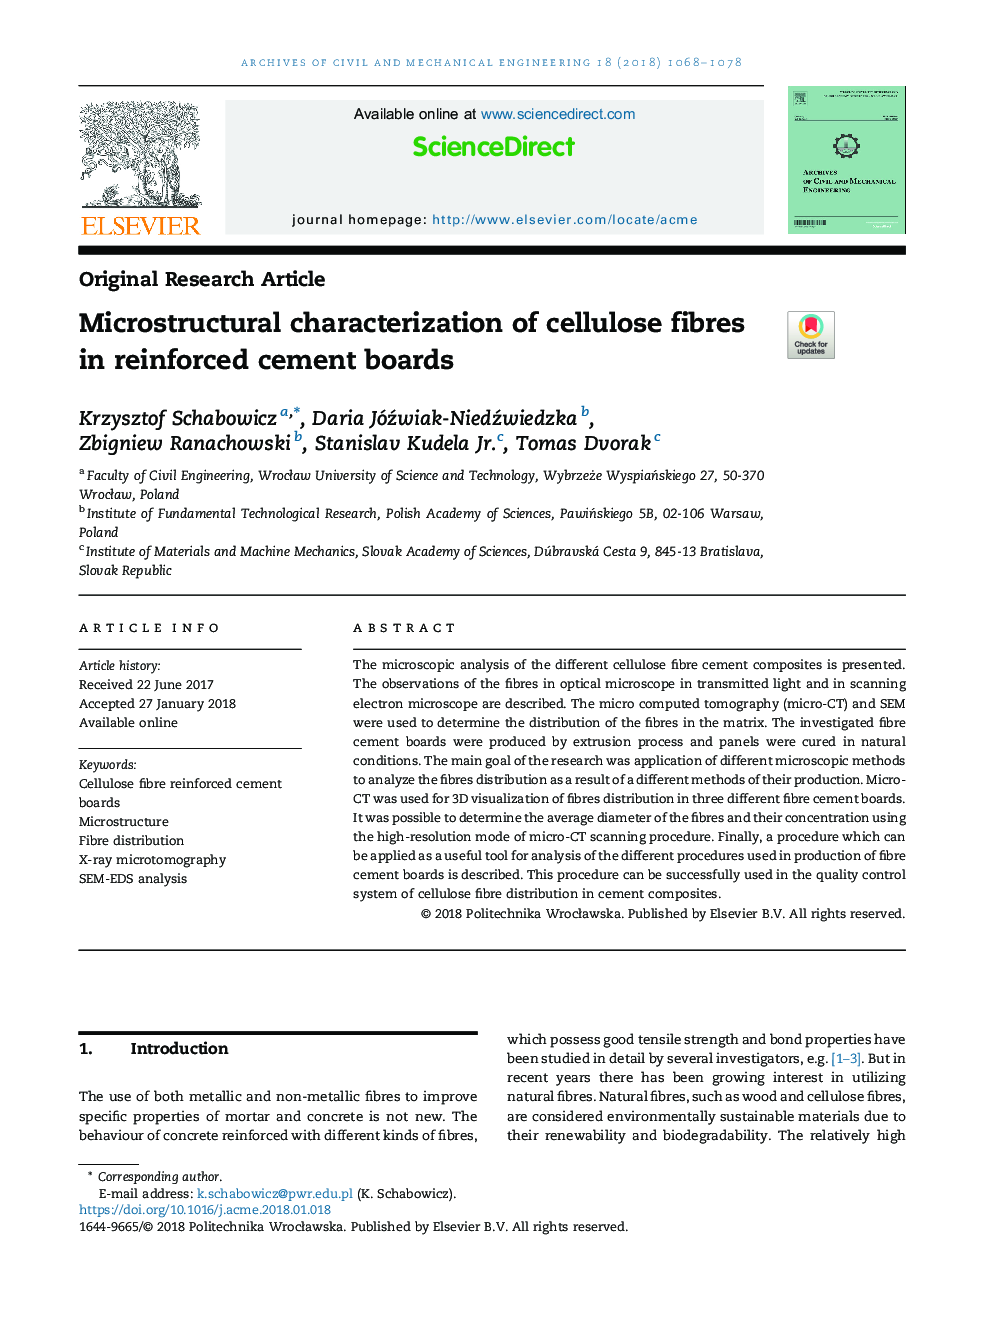 Microstructural characterization of cellulose fibres in reinforced cement boards